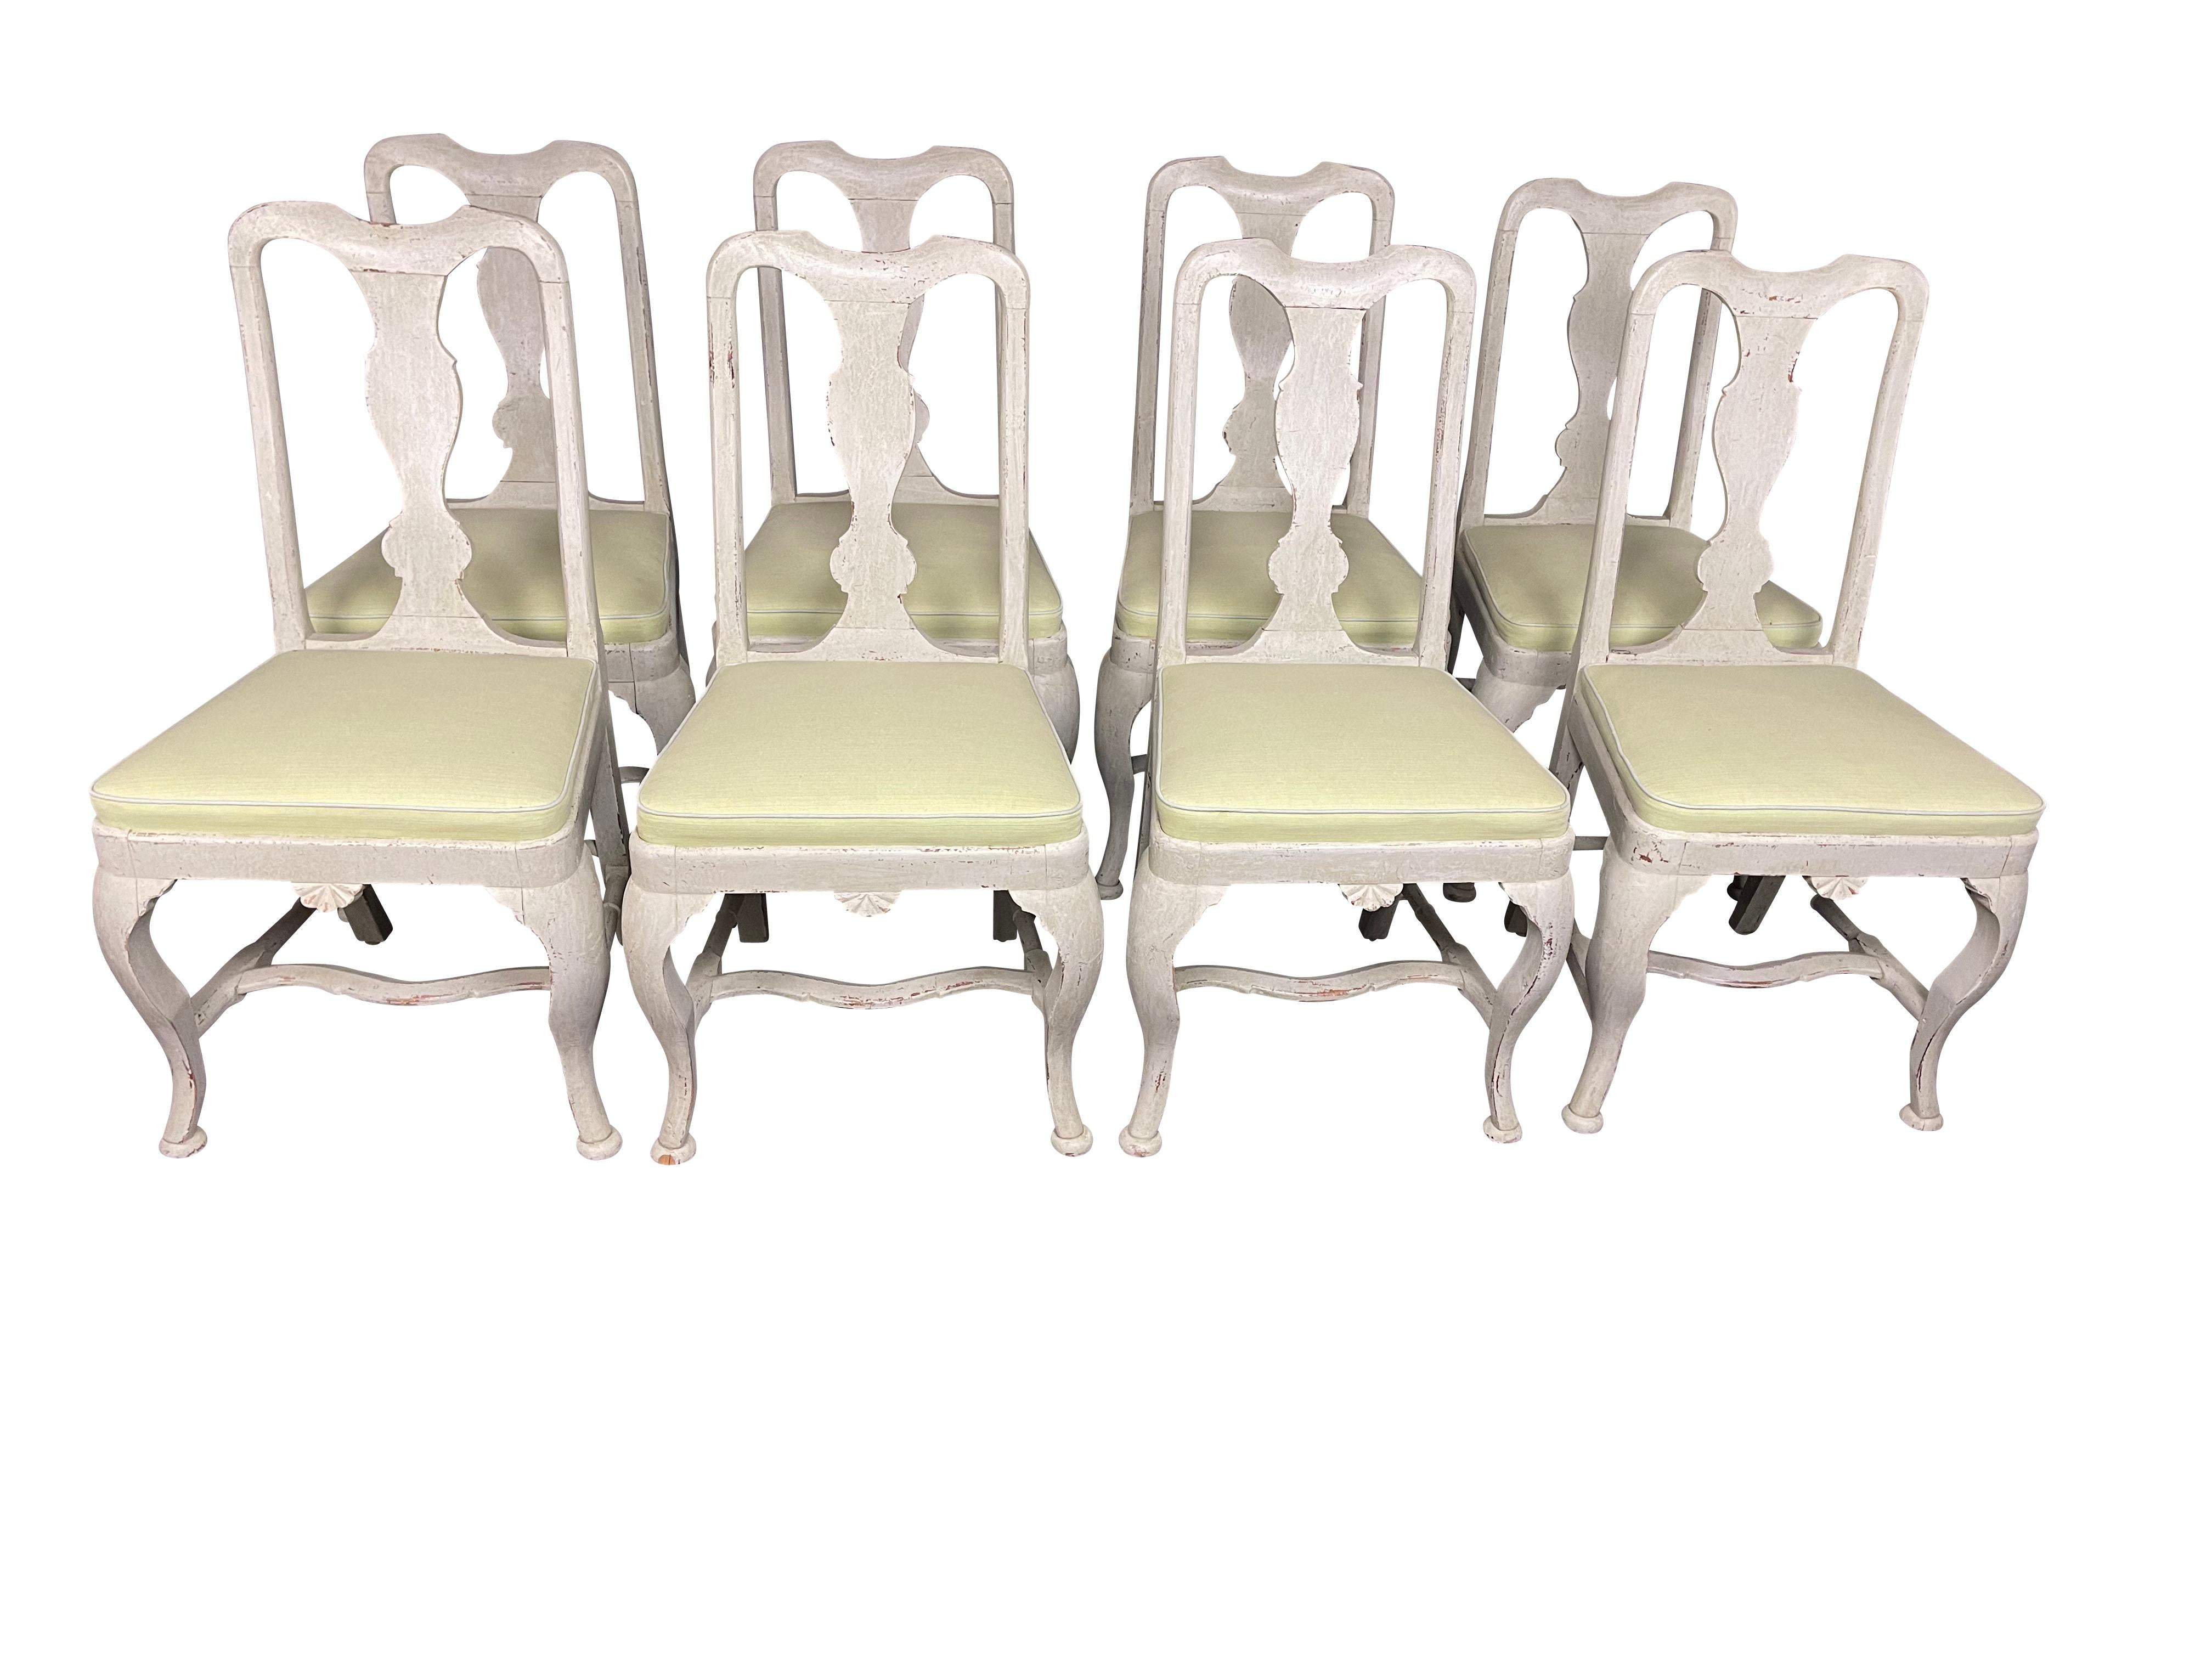 A very fine set of eight Swedish-style grey lime-washed dining chairs in the Queen Anne style with pierced splat backs, carved and shaped seat rail, refined cabriole legs, and H-stretcher. Well-proportioned chairs with restrained elegance. The